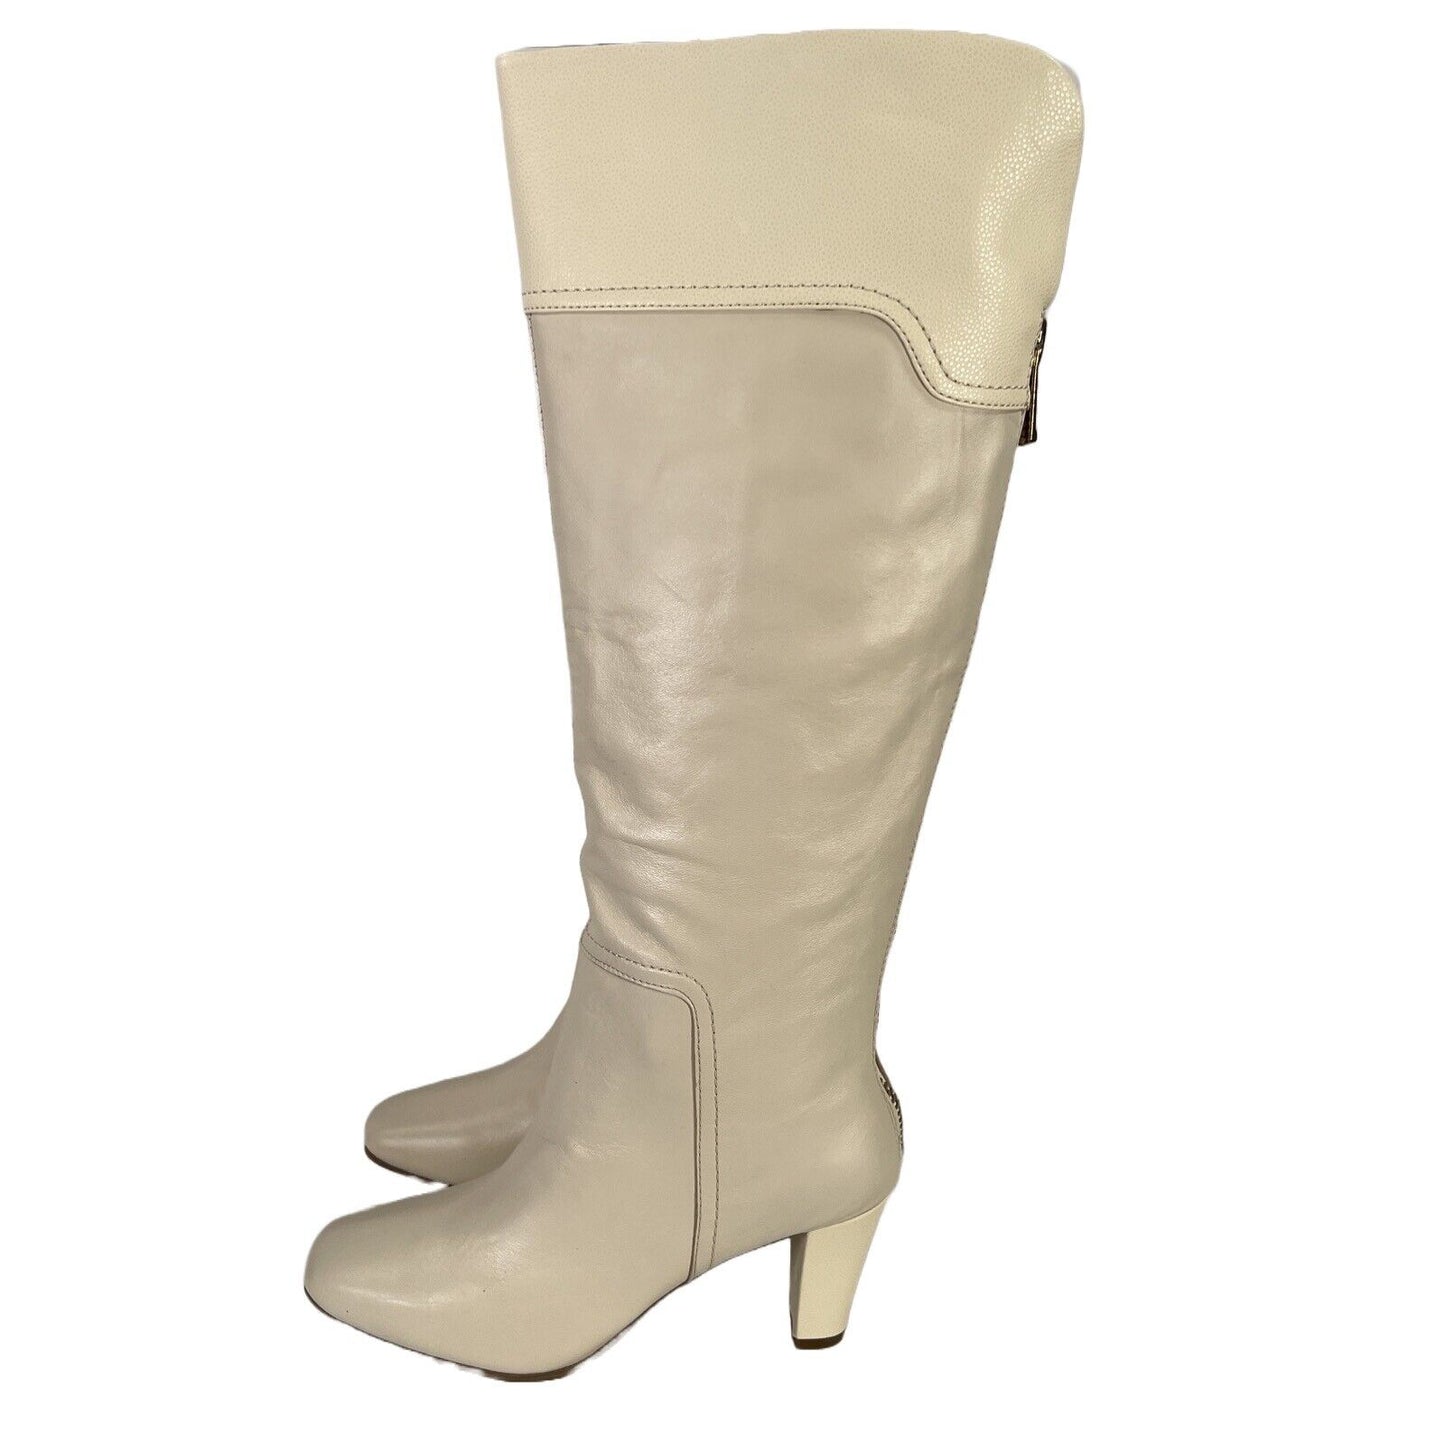 NEW Bandolino Women's Ivory Leather Viet Over The Knee Boots - 7.5